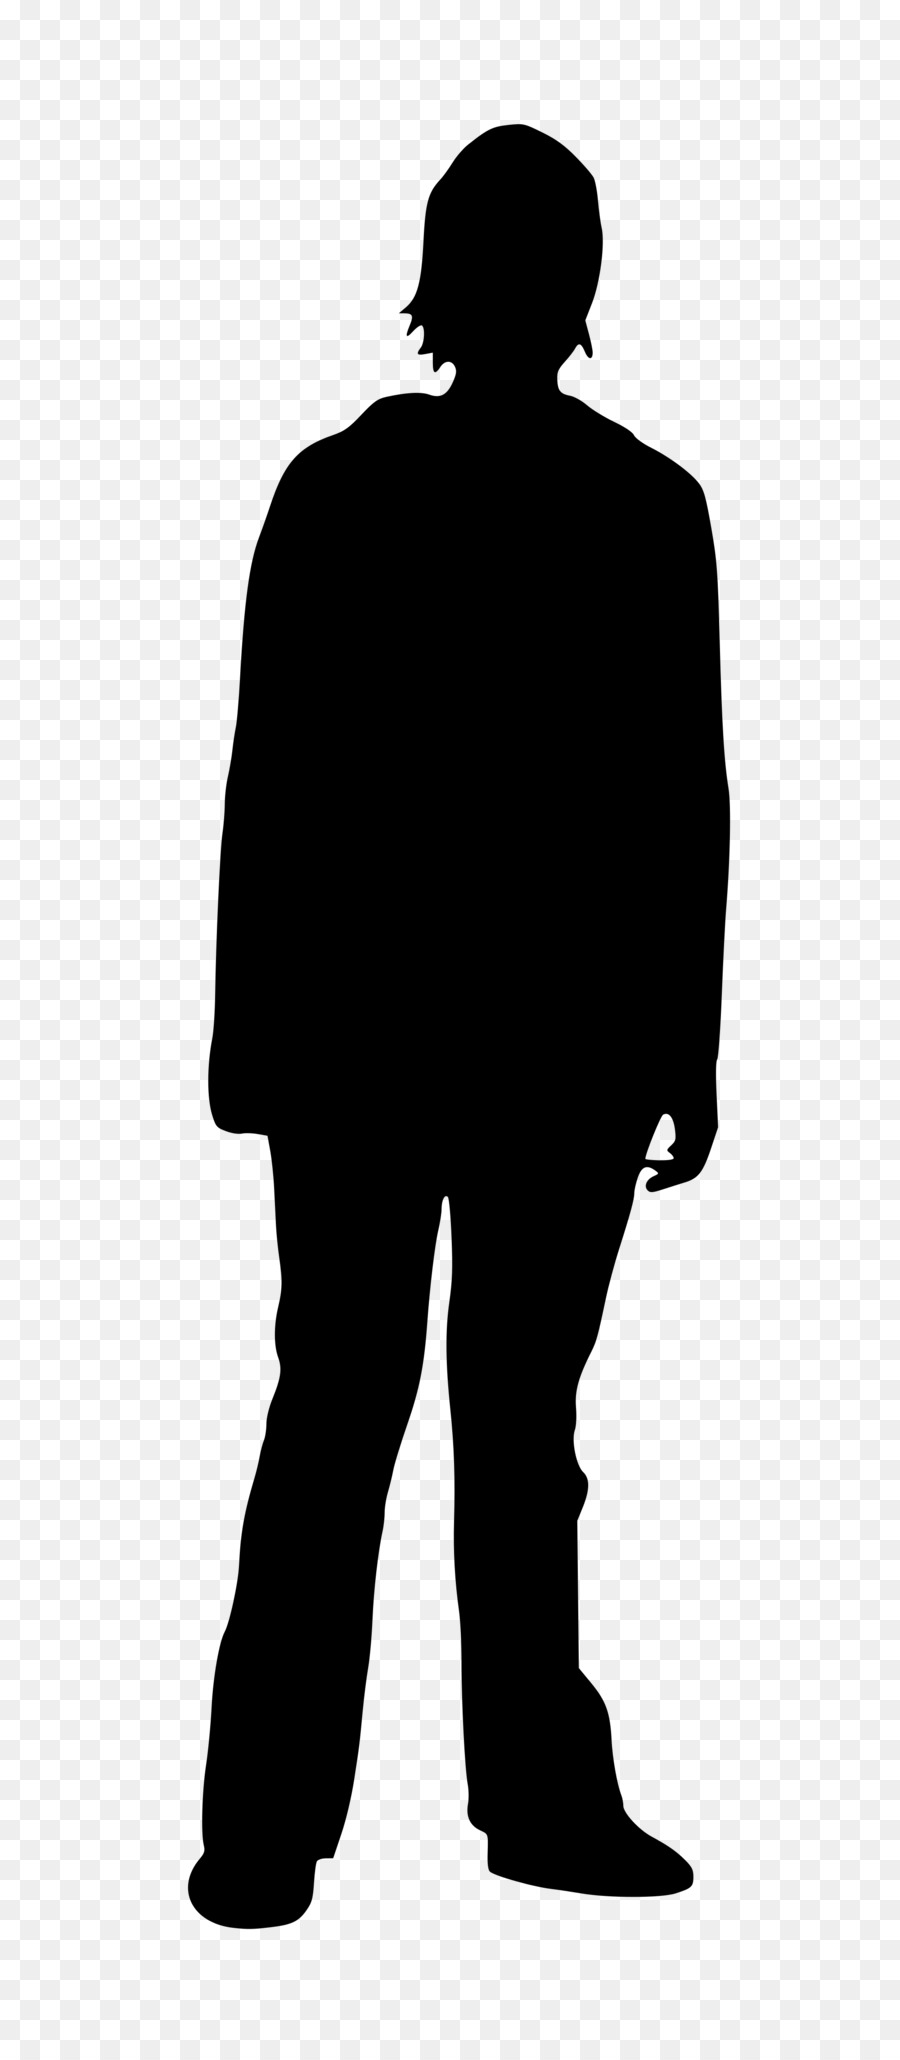 Free Silhouette Man Png, Download Free Silhouette Man Png png images ...